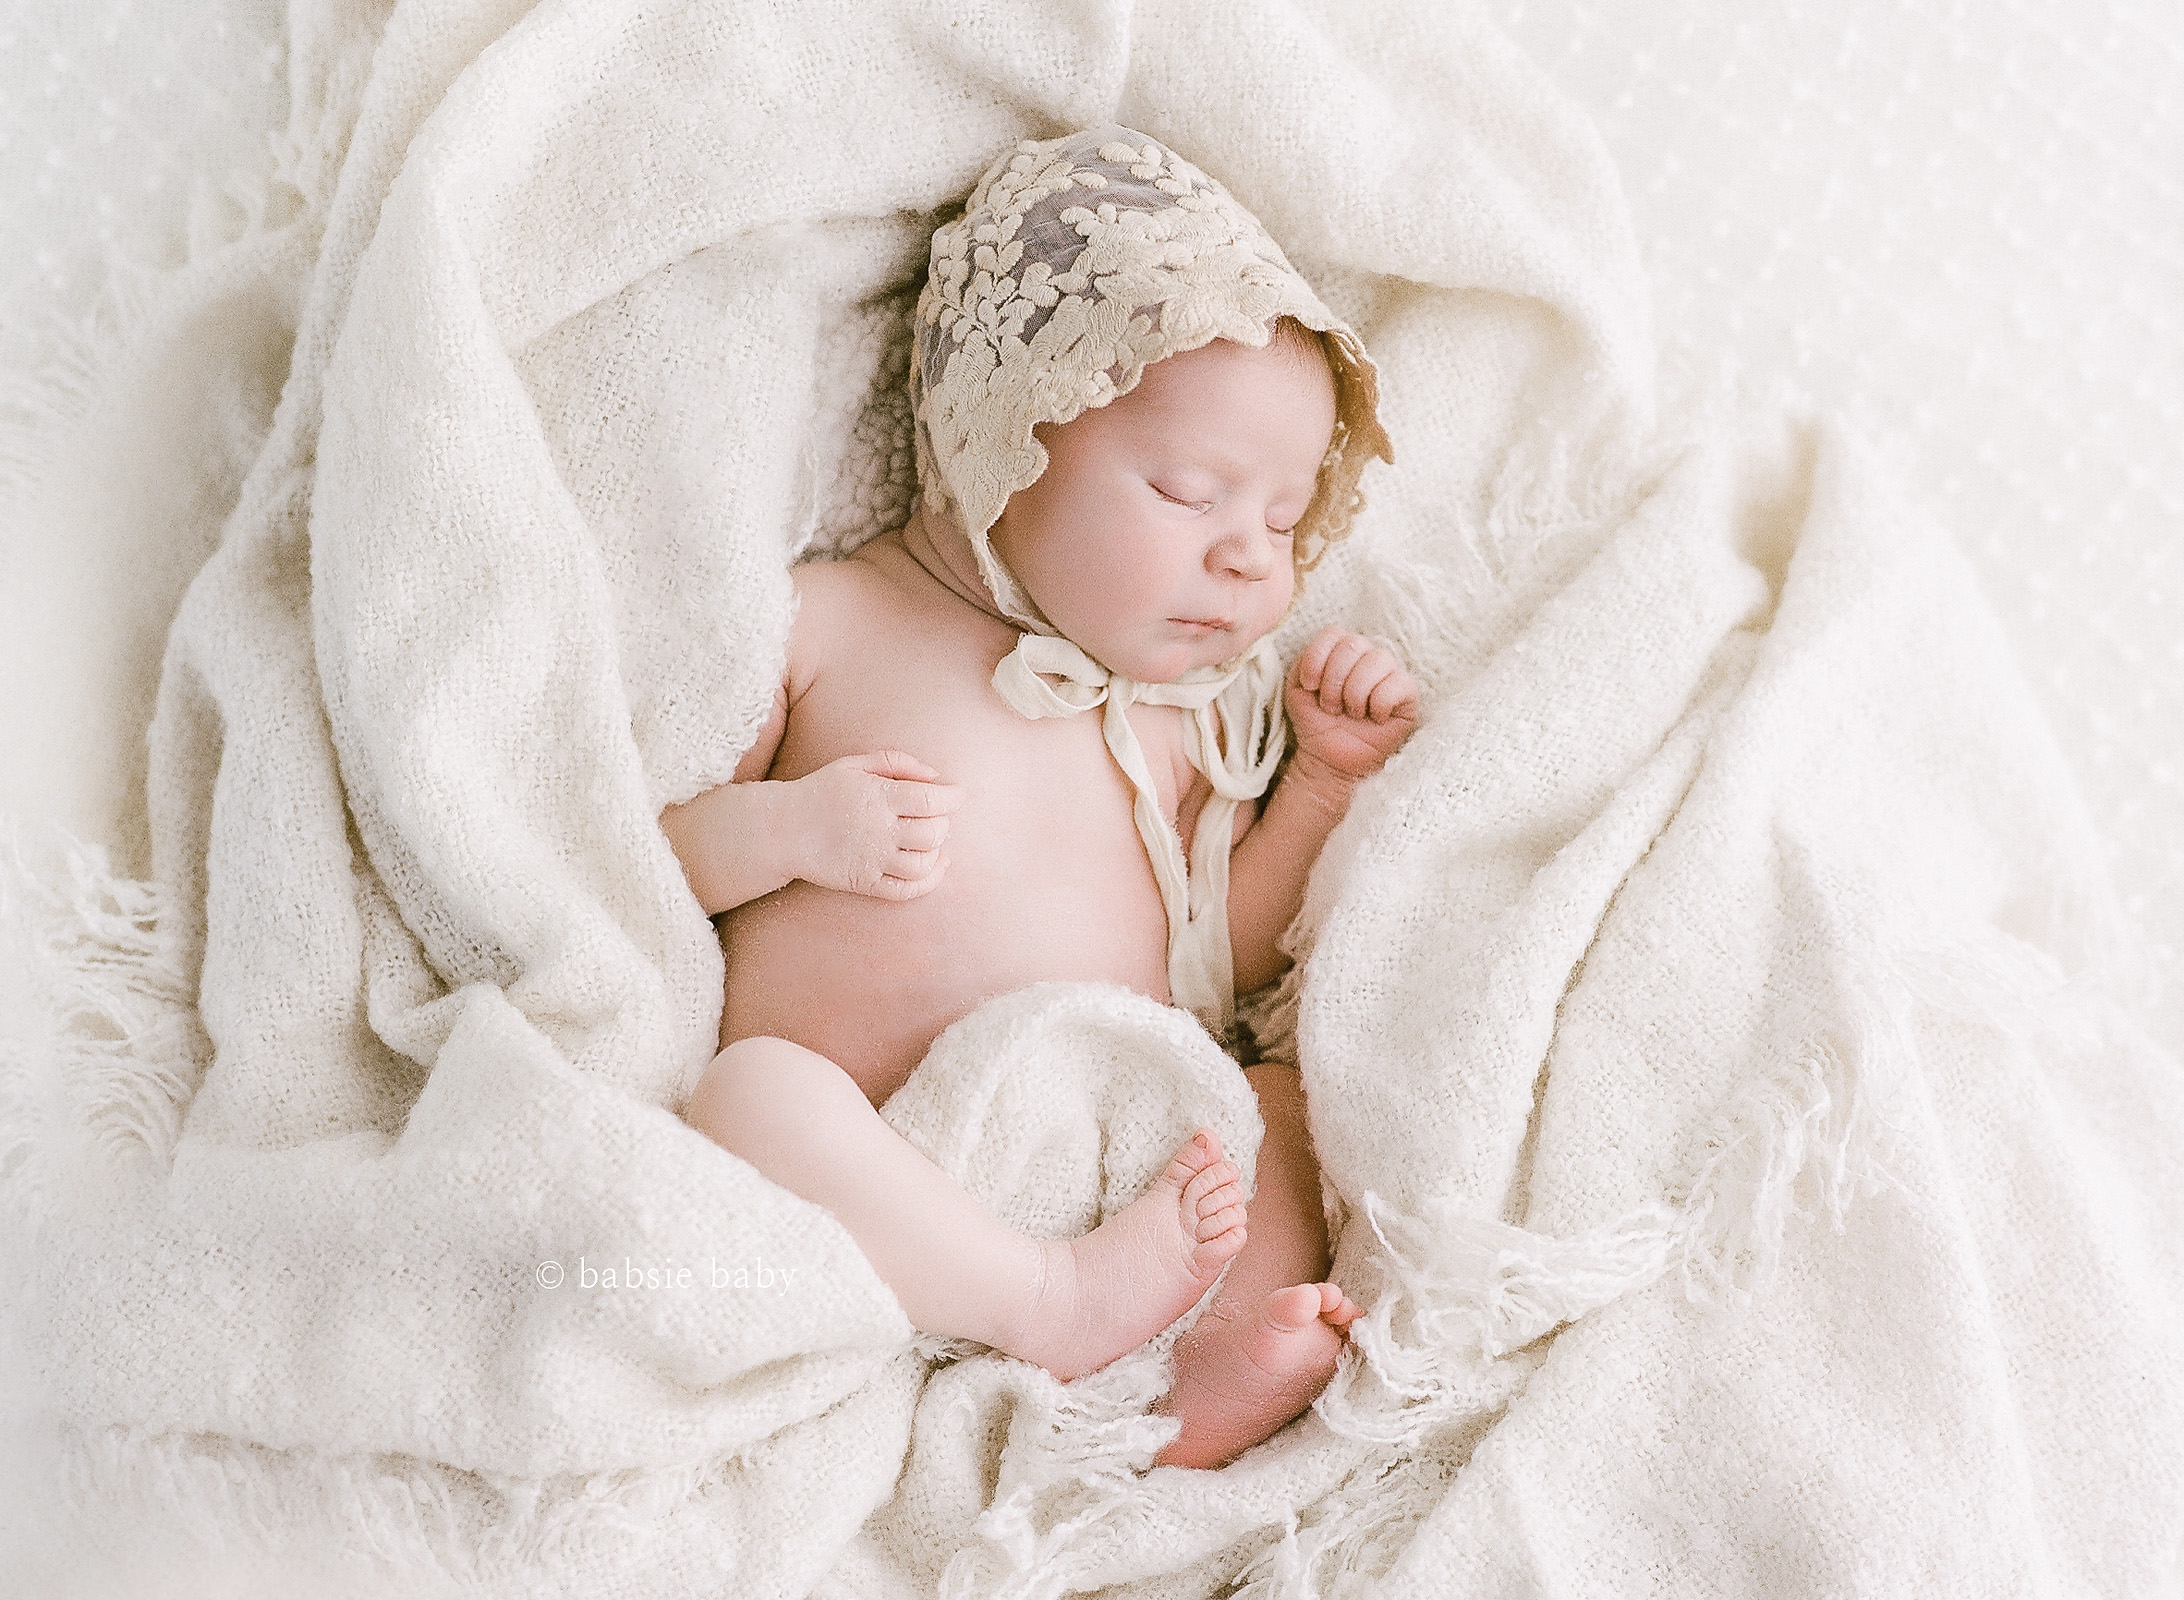 Timeless baby bonnet on a newborn girl at her photo session.